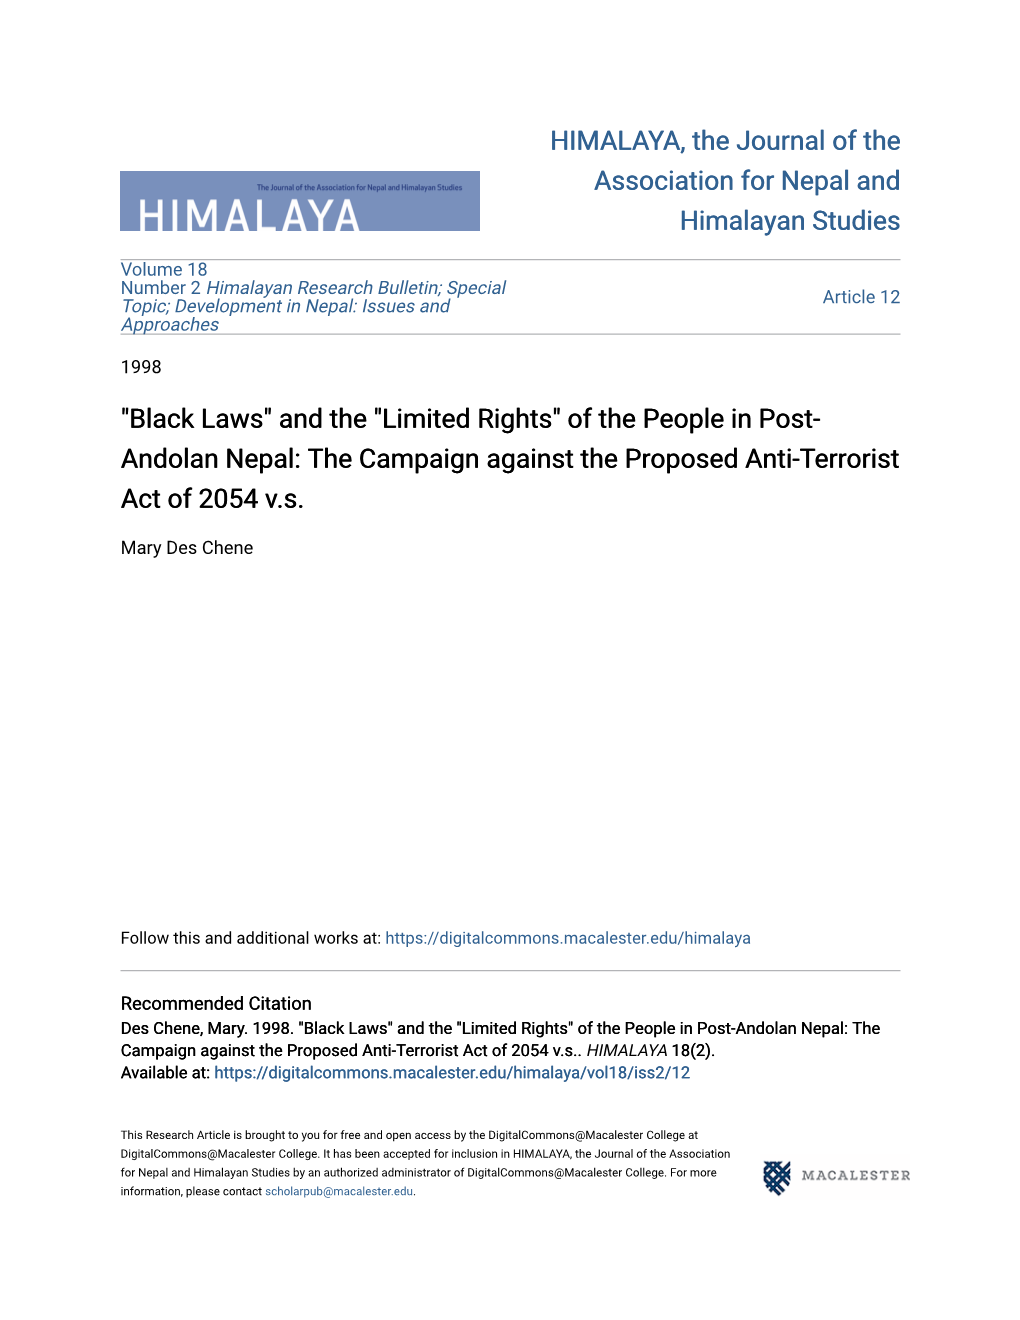 "Black Laws" and the "Limited Rights" of the People in Post- Andolan Nepal: the Campaign Against the Proposed Anti-Terrorist Act of 2054 V.S